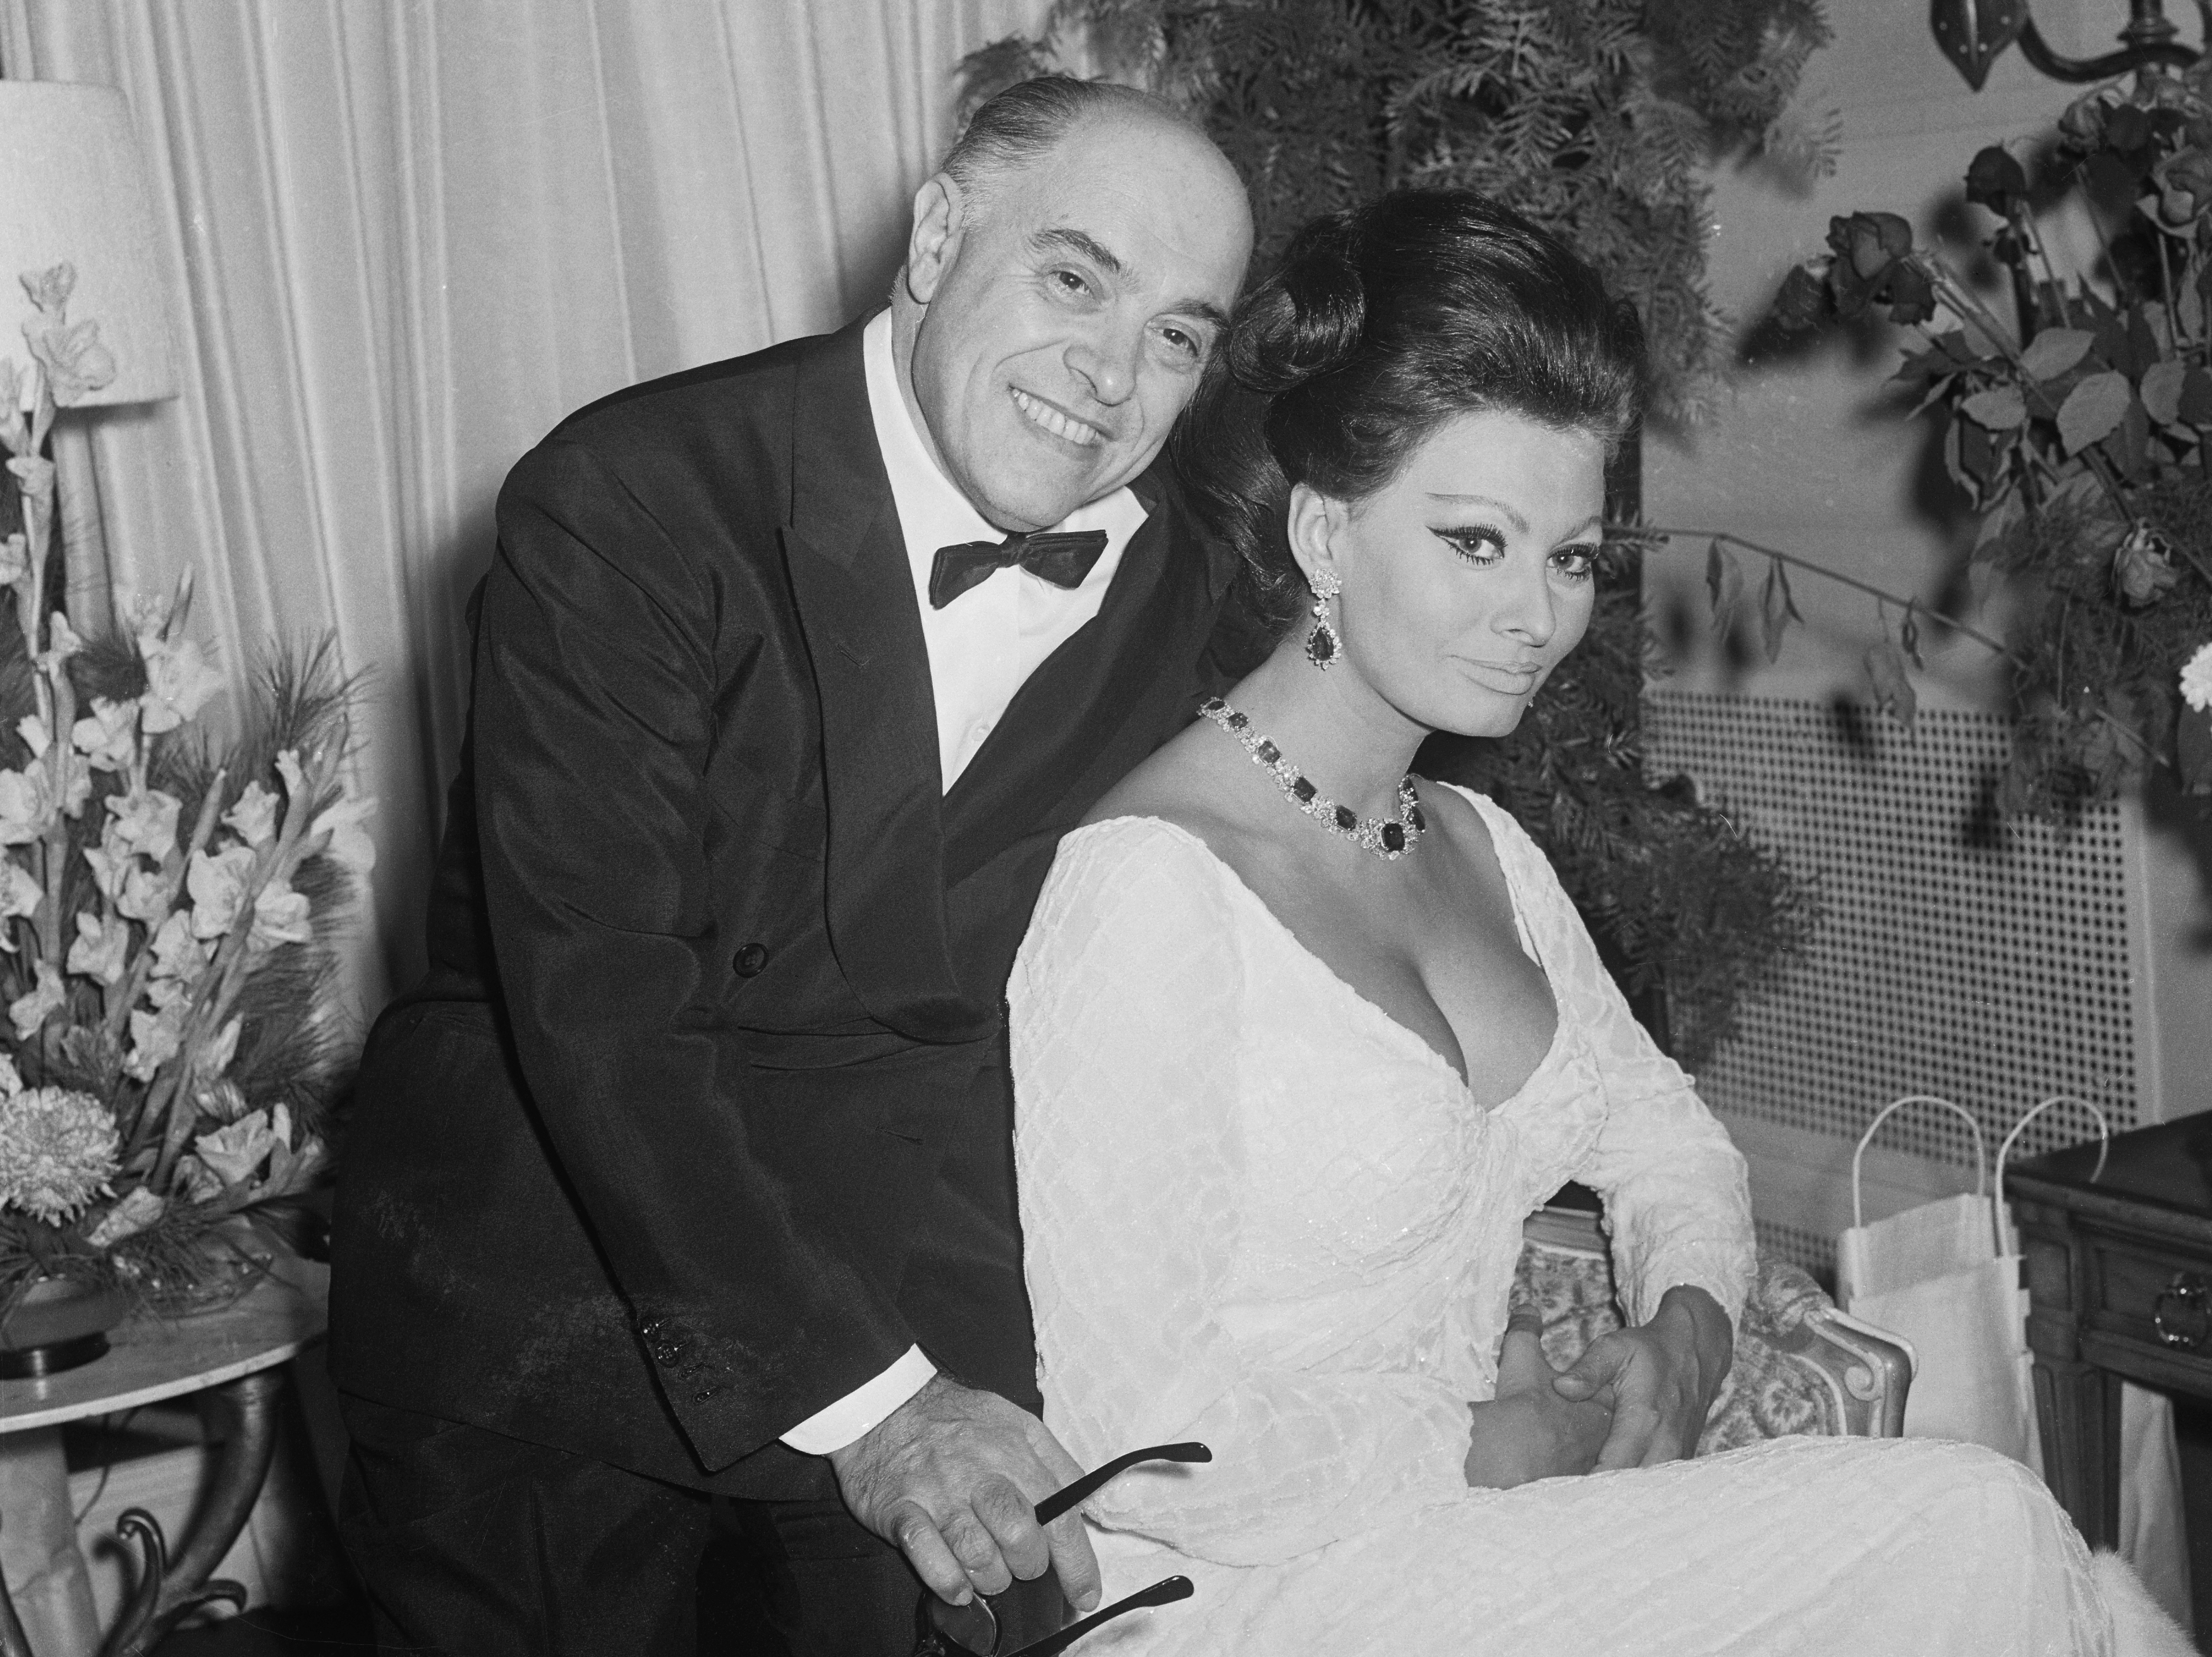 Sophia Loren and Carlo Ponti in New York on December 22, 1962 | Source: Getty Images